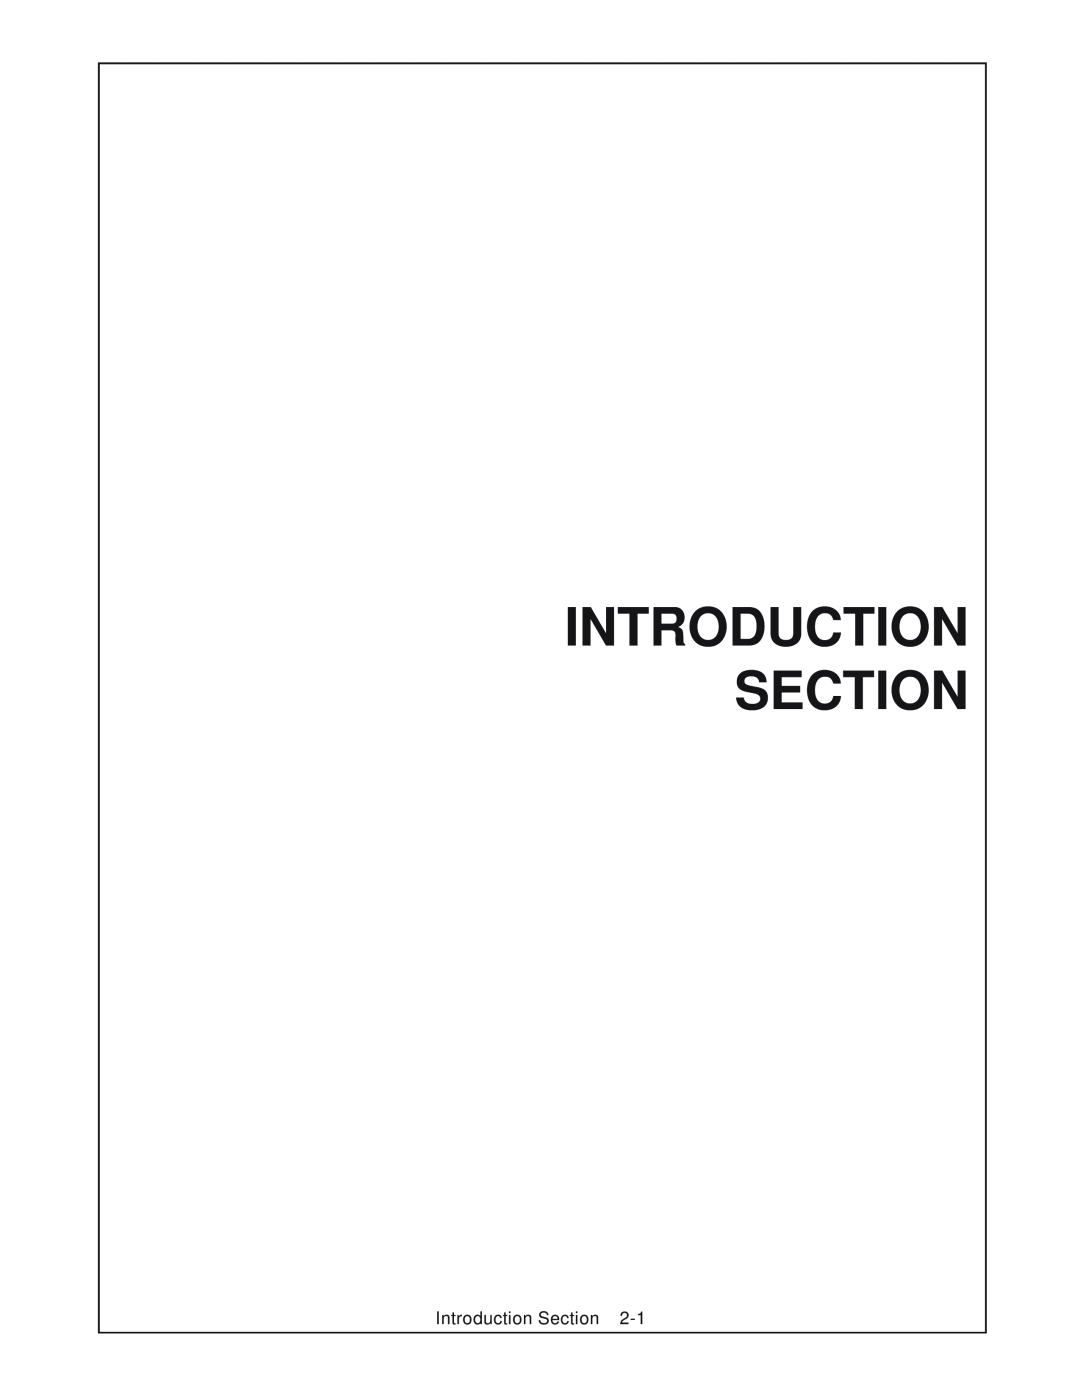 Tiger RBF-14C manual Introduction Section 